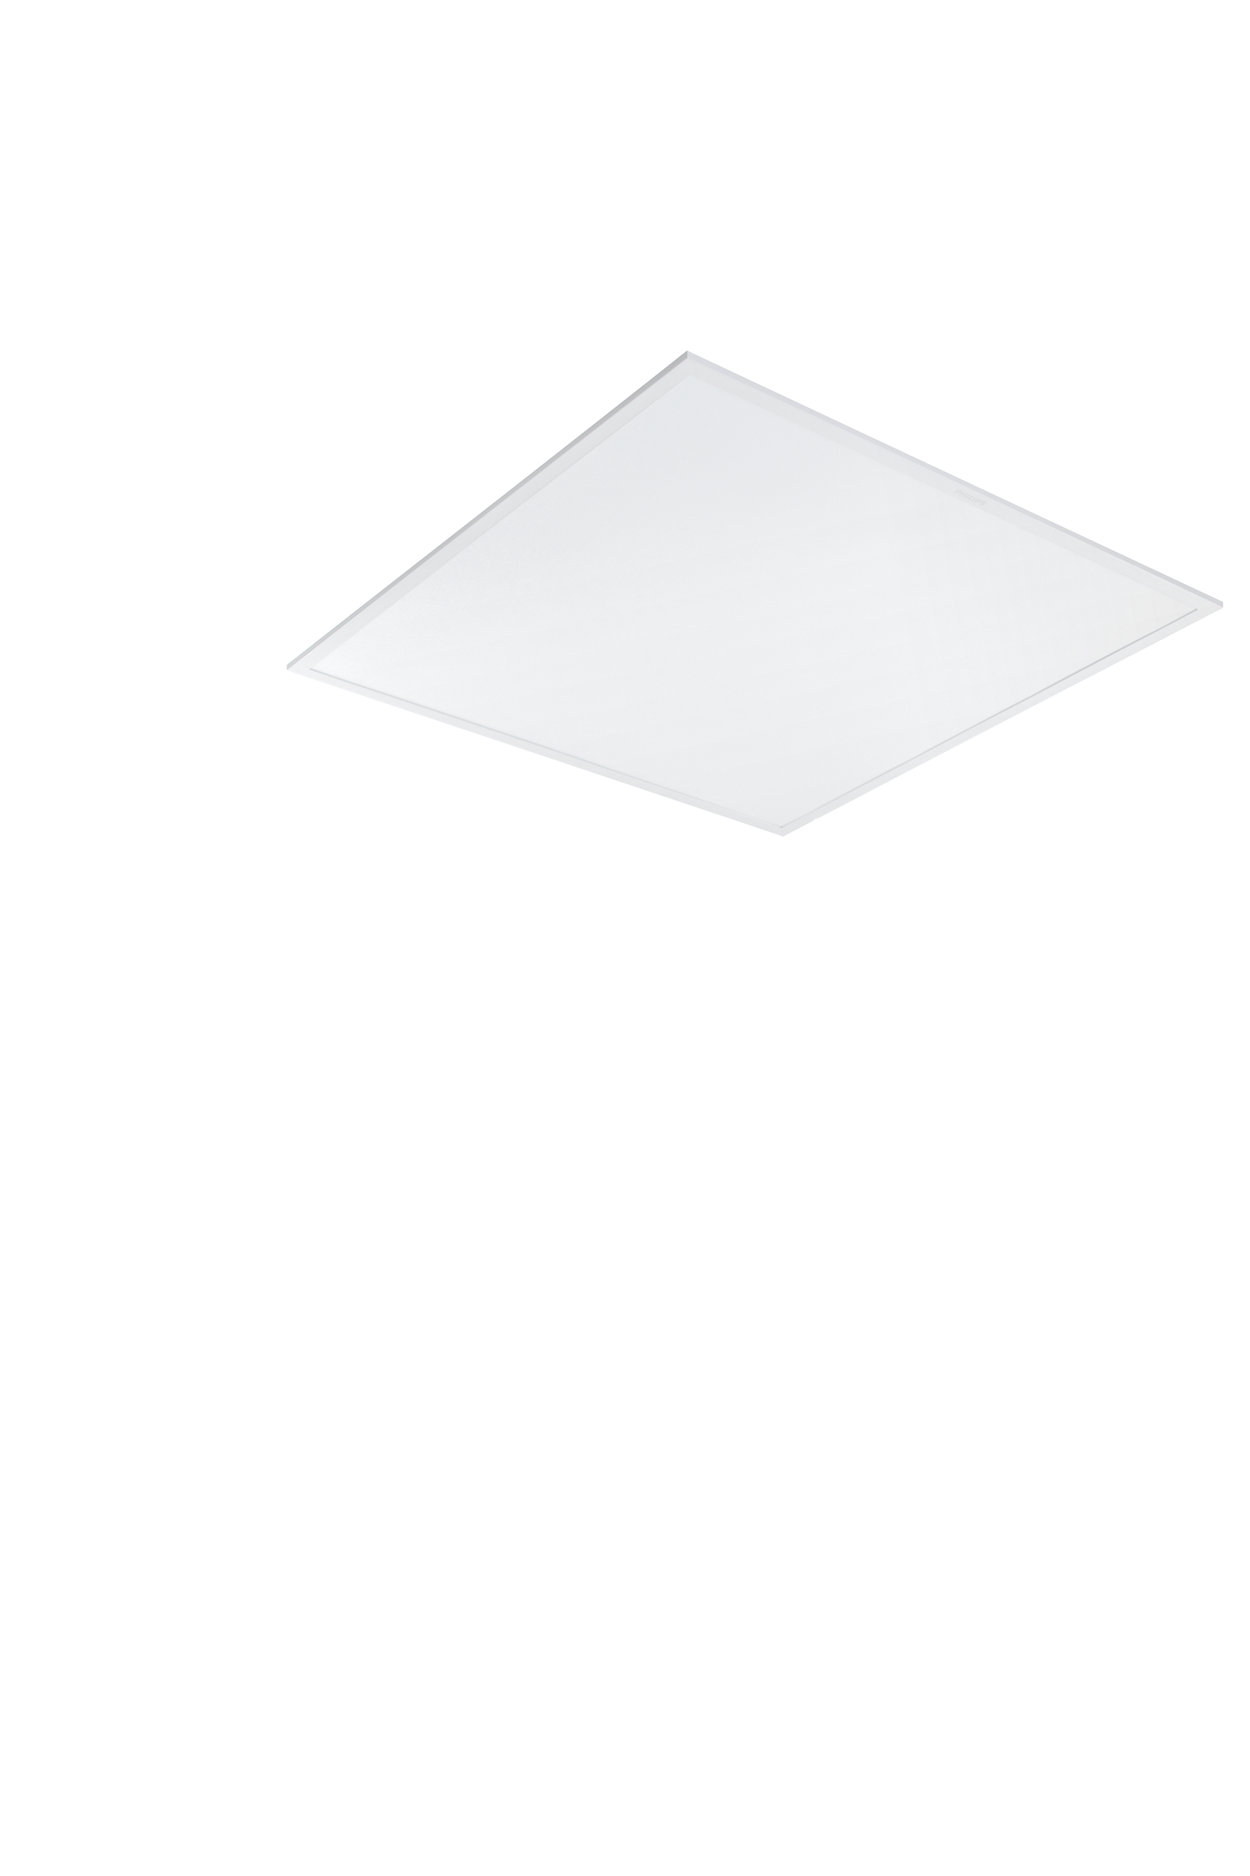 The most affordable LED panel delivering comfortable light with excellent uniformity. Slimmer then it’s predecessor, it is durable, energy efficient and with 3 years warranty